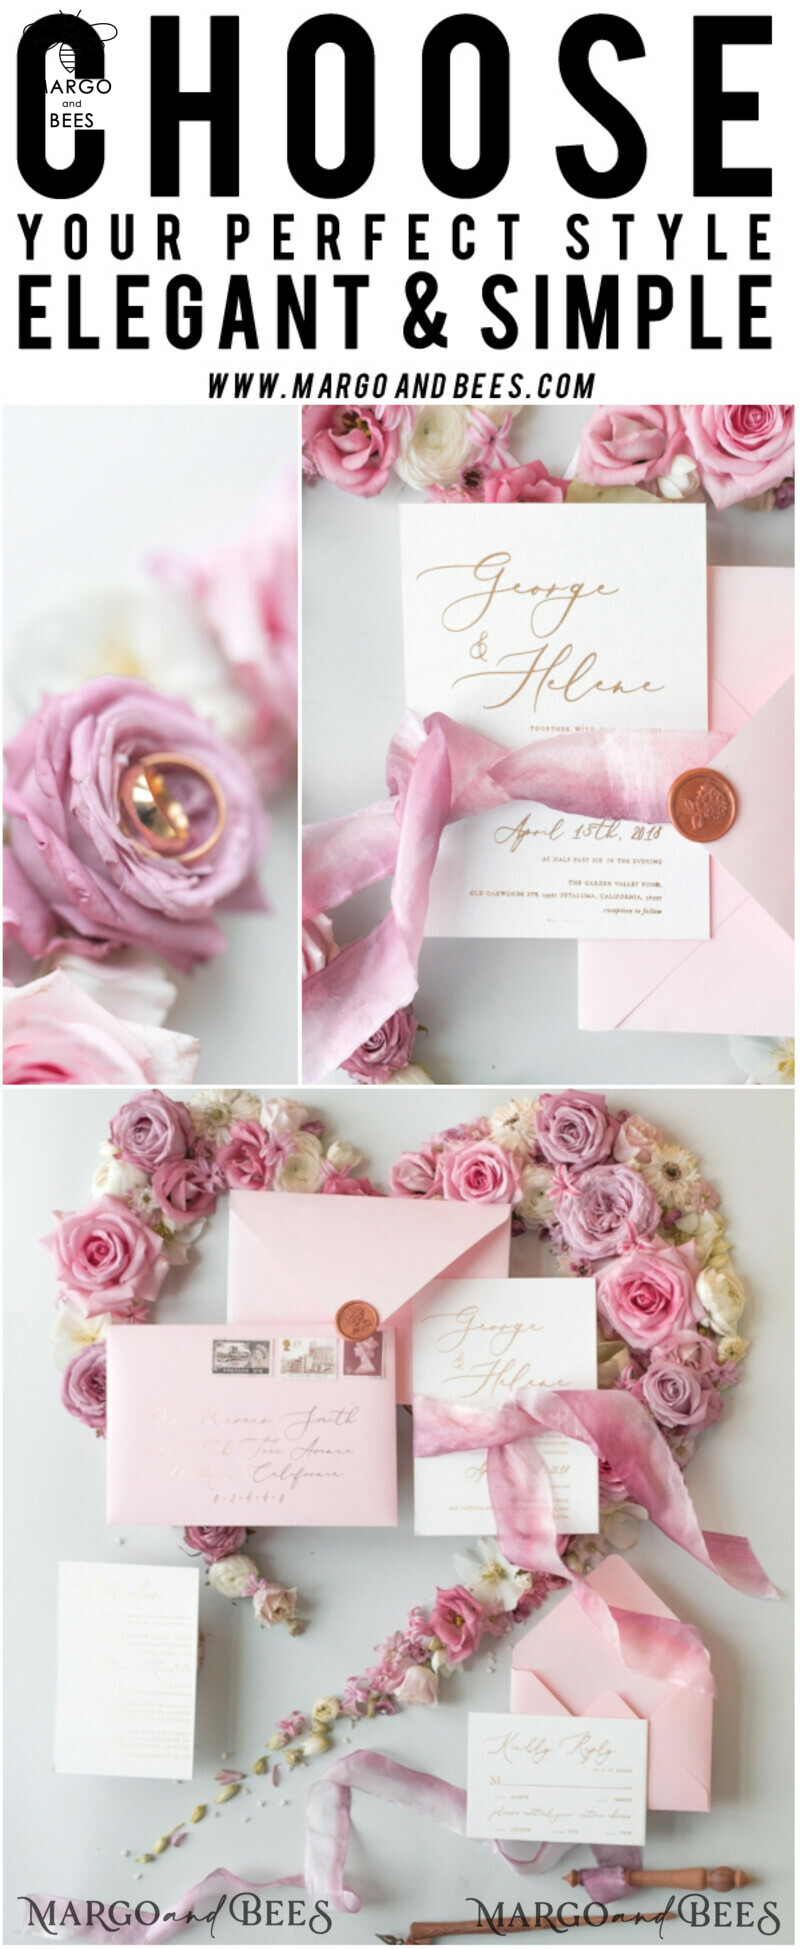 Elegant Personalized Wedding Invitations Romantic Stationery with Vintage Garden Roses and  Handmade Silk Bow Gold Foil Letters  Blush Pink Envelope -50